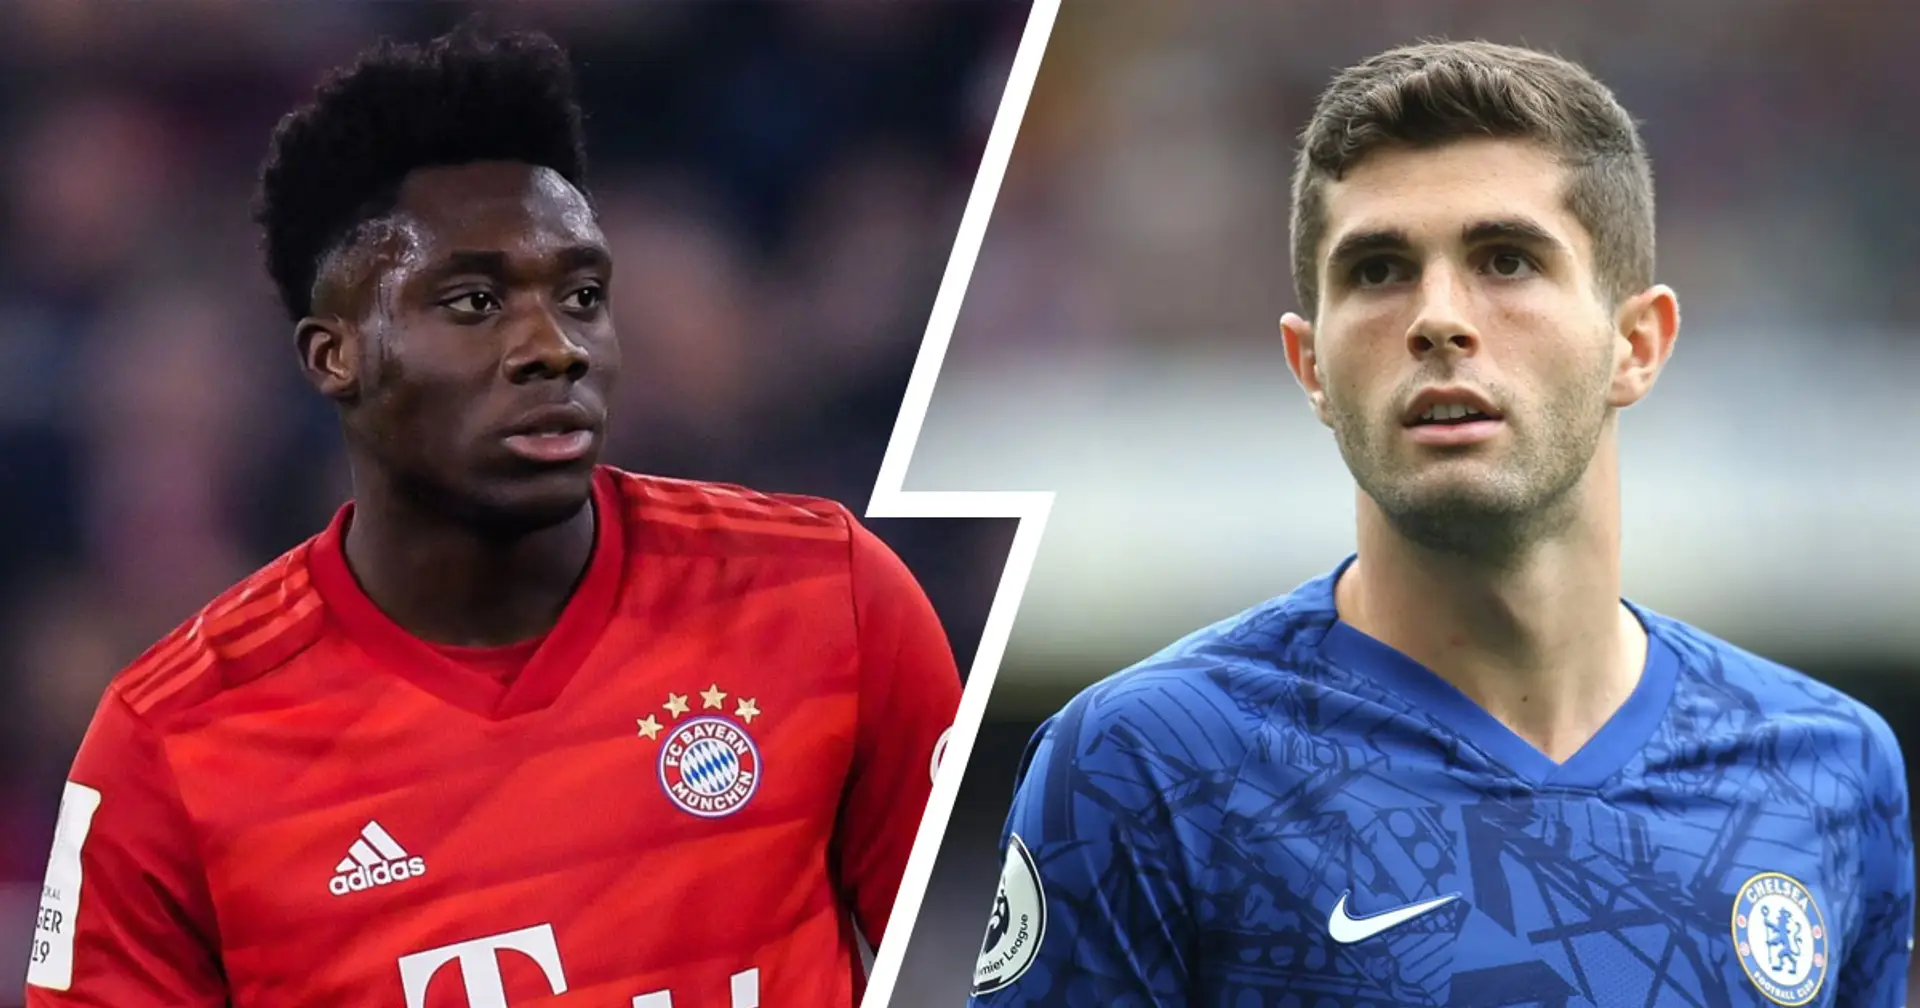 Man United passed up on Christian Pulisic AND Alphonso Davies despite scout recommendations